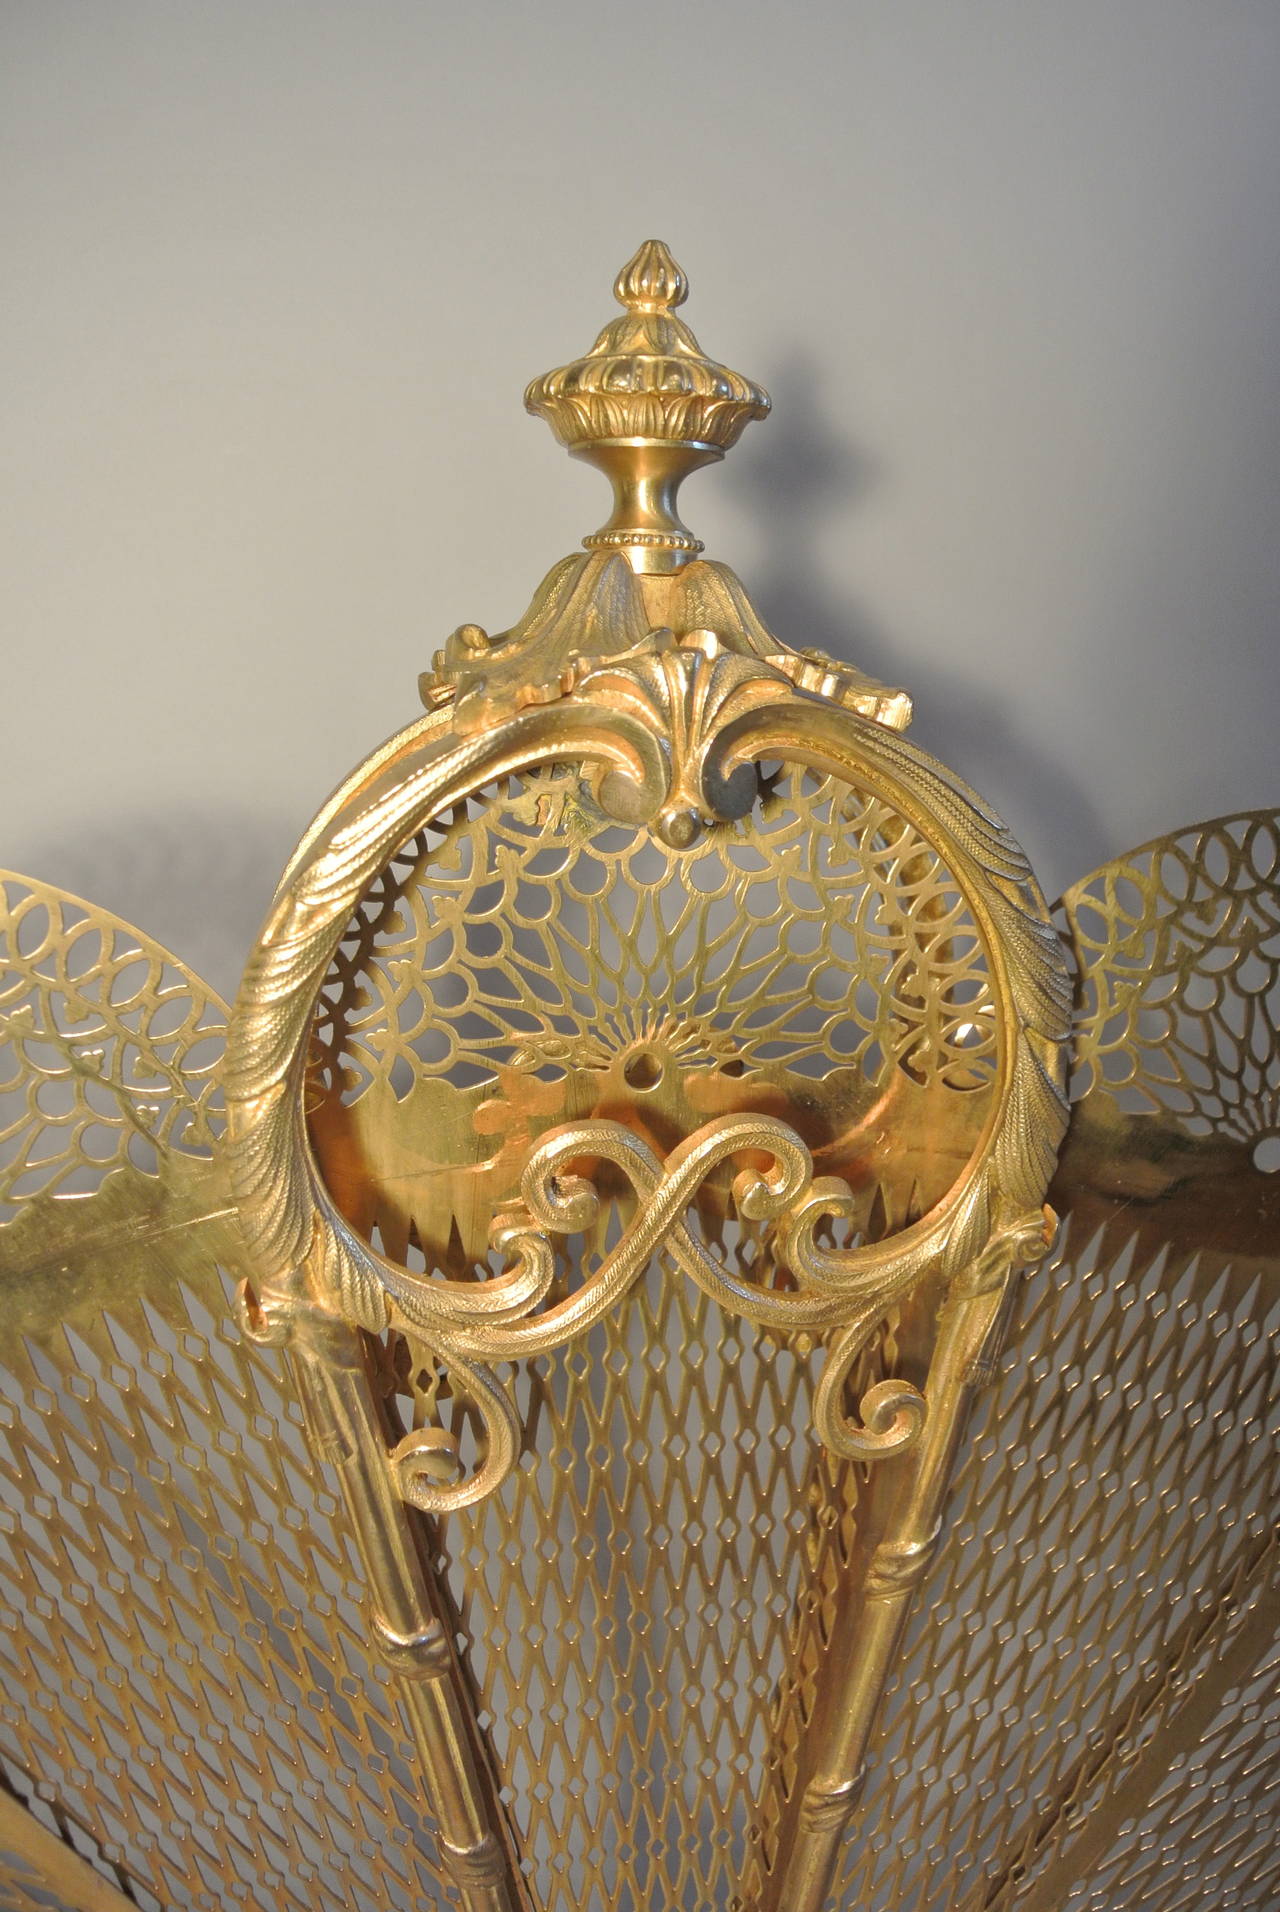 Gilt Exceptional Quality Bronze Dore Fire Place Screen in a Peacock Fan Design.